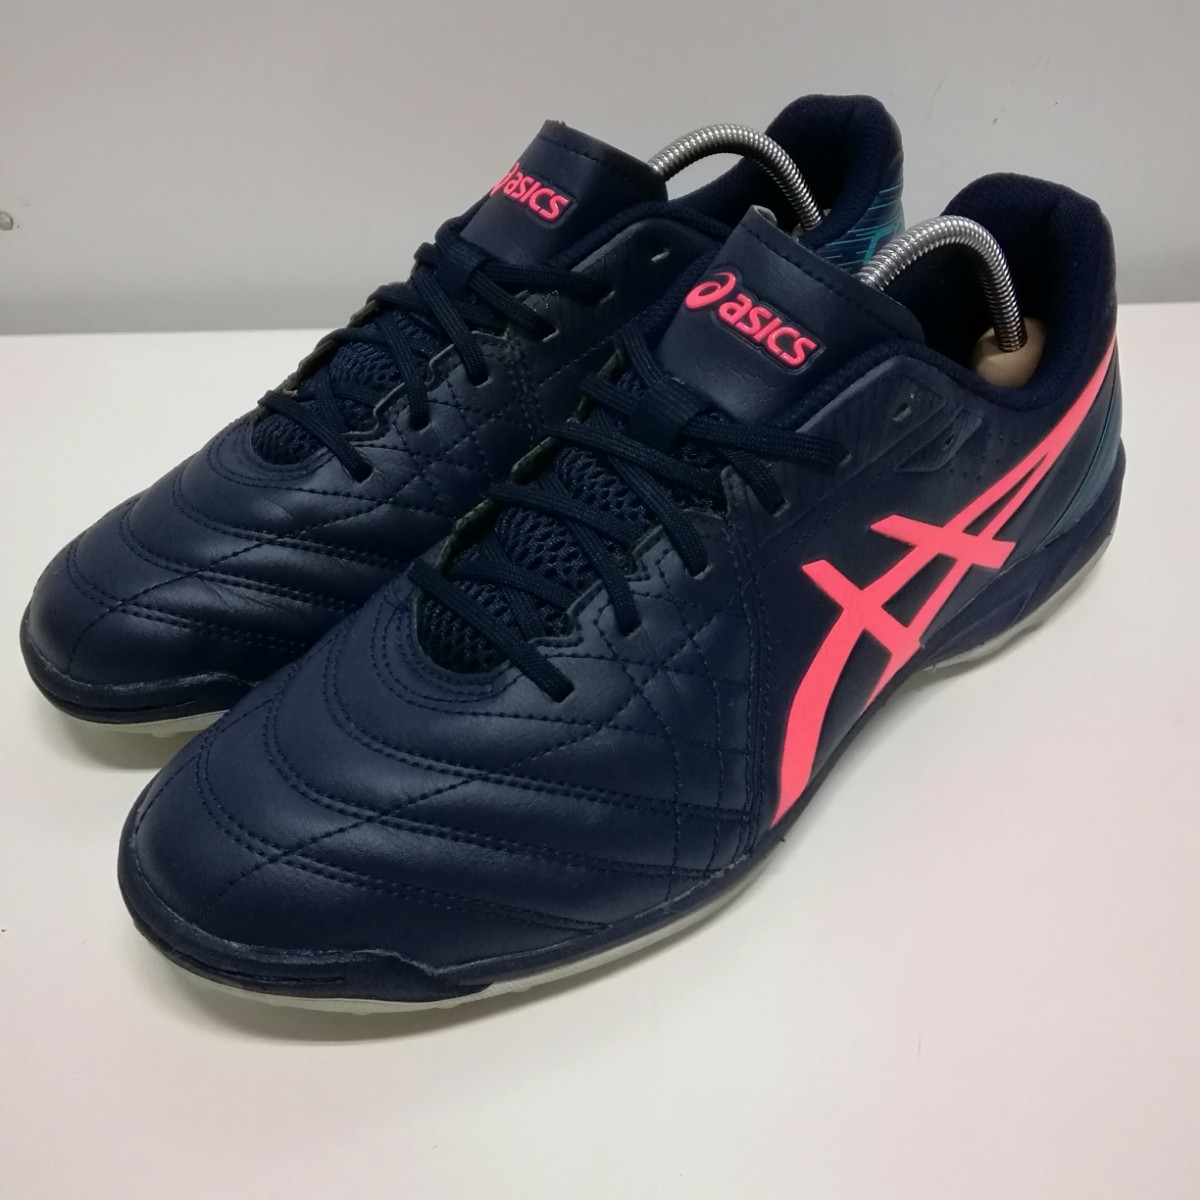 asics アシックス 1113A008 CALCETTO WD 8 TF カルチェット 靴